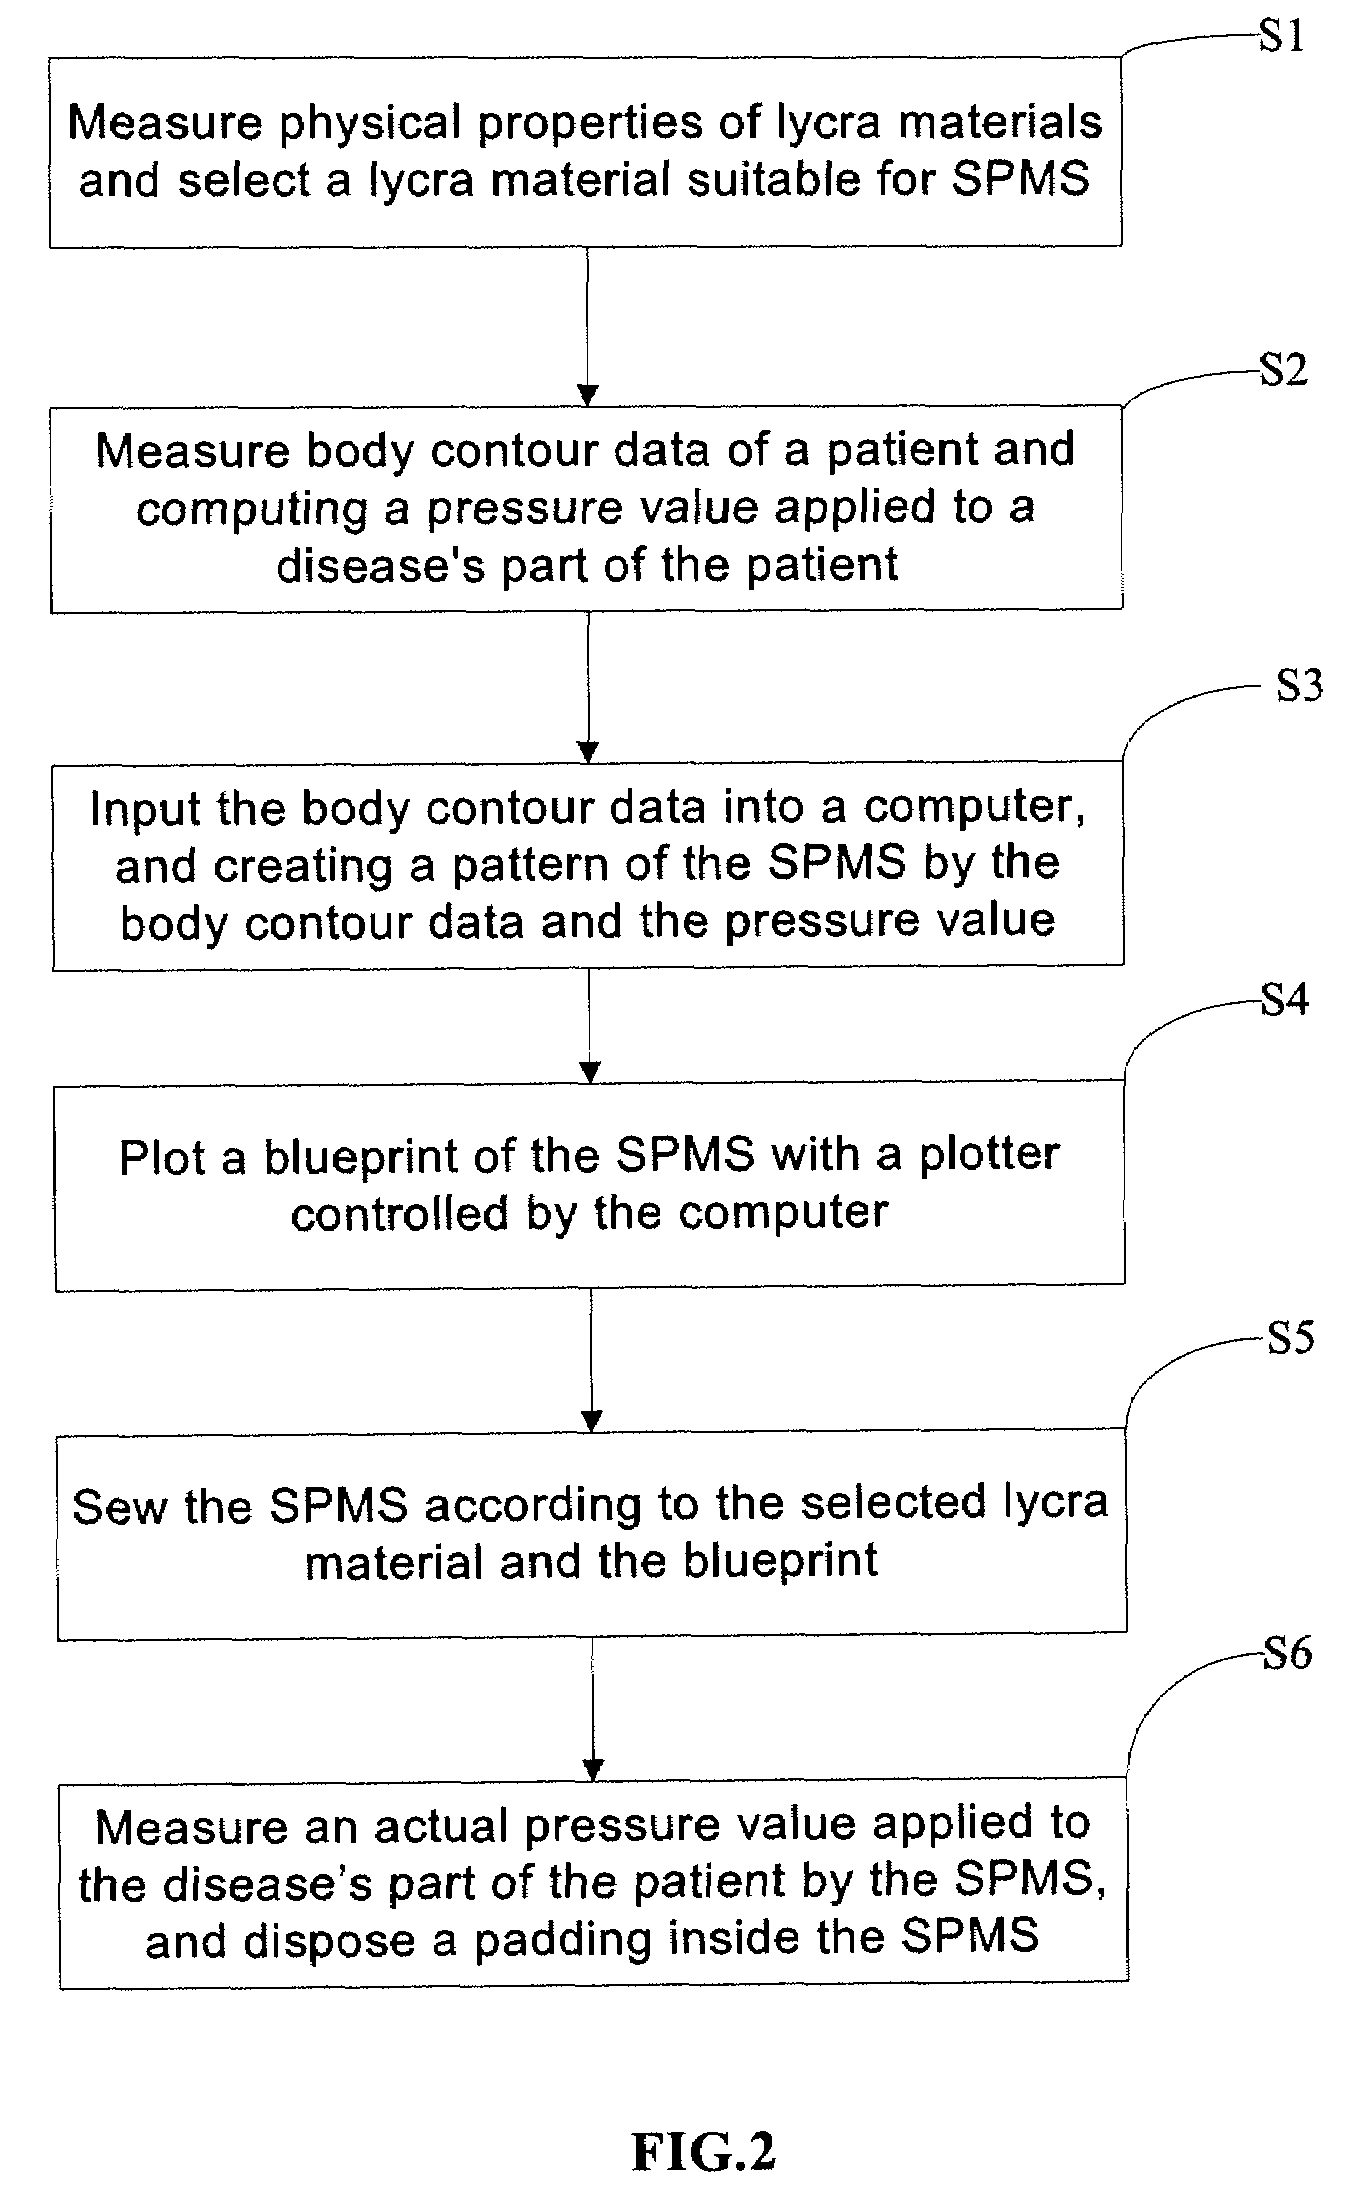 Method for manufacturing smart pressure monitored suits